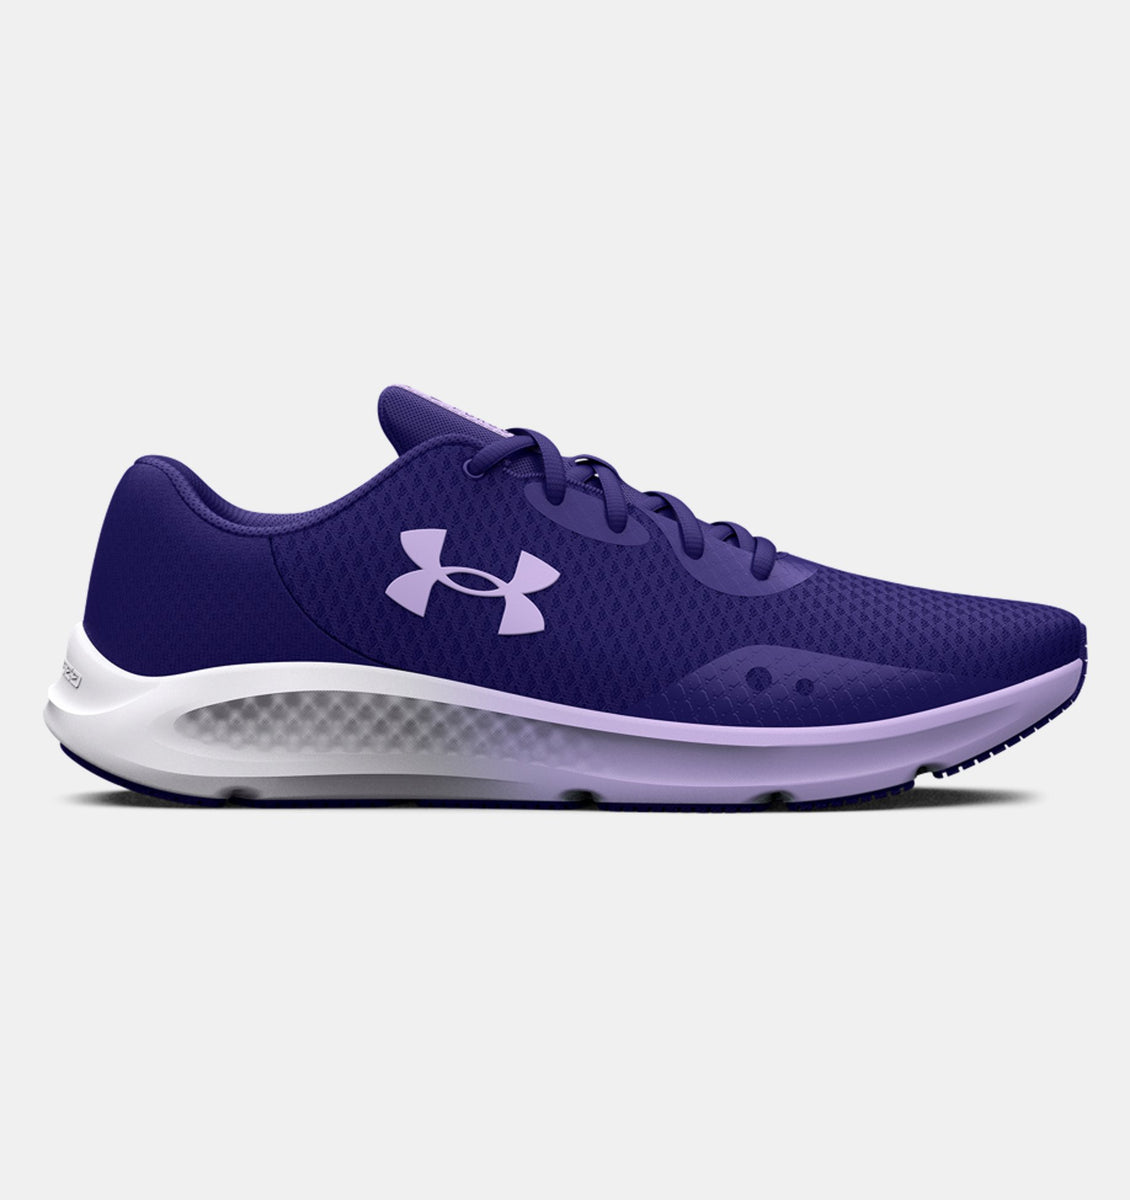 Under Armour Charged Pursuit 3 SKU: 9598751 